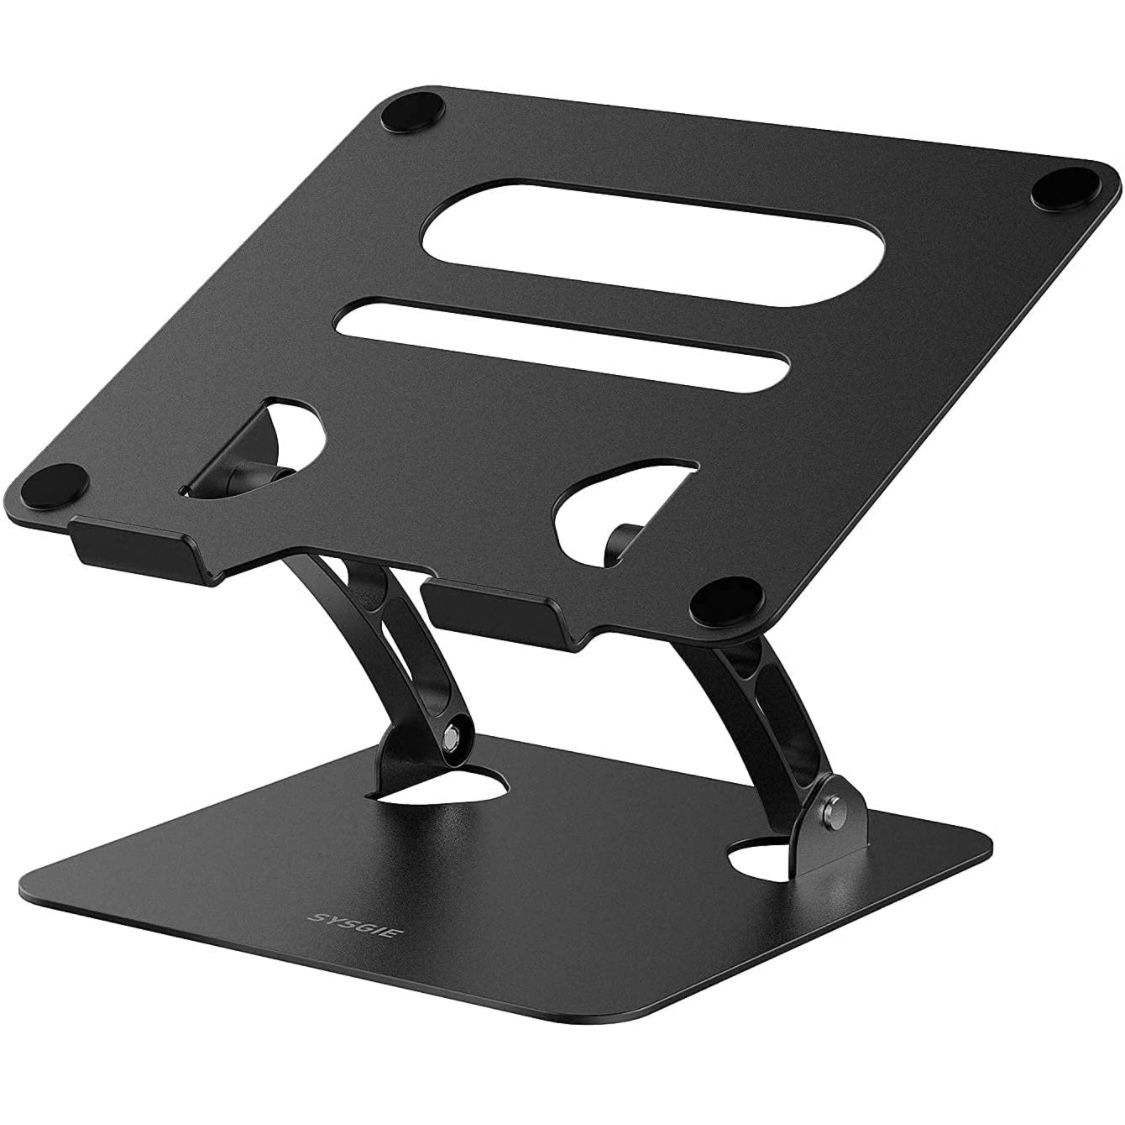 New-Laptop Stand, Adjustable, Compatible with MacBook Air Pro, Dell XPS, Lenovo More 10-17" Laptops,Black